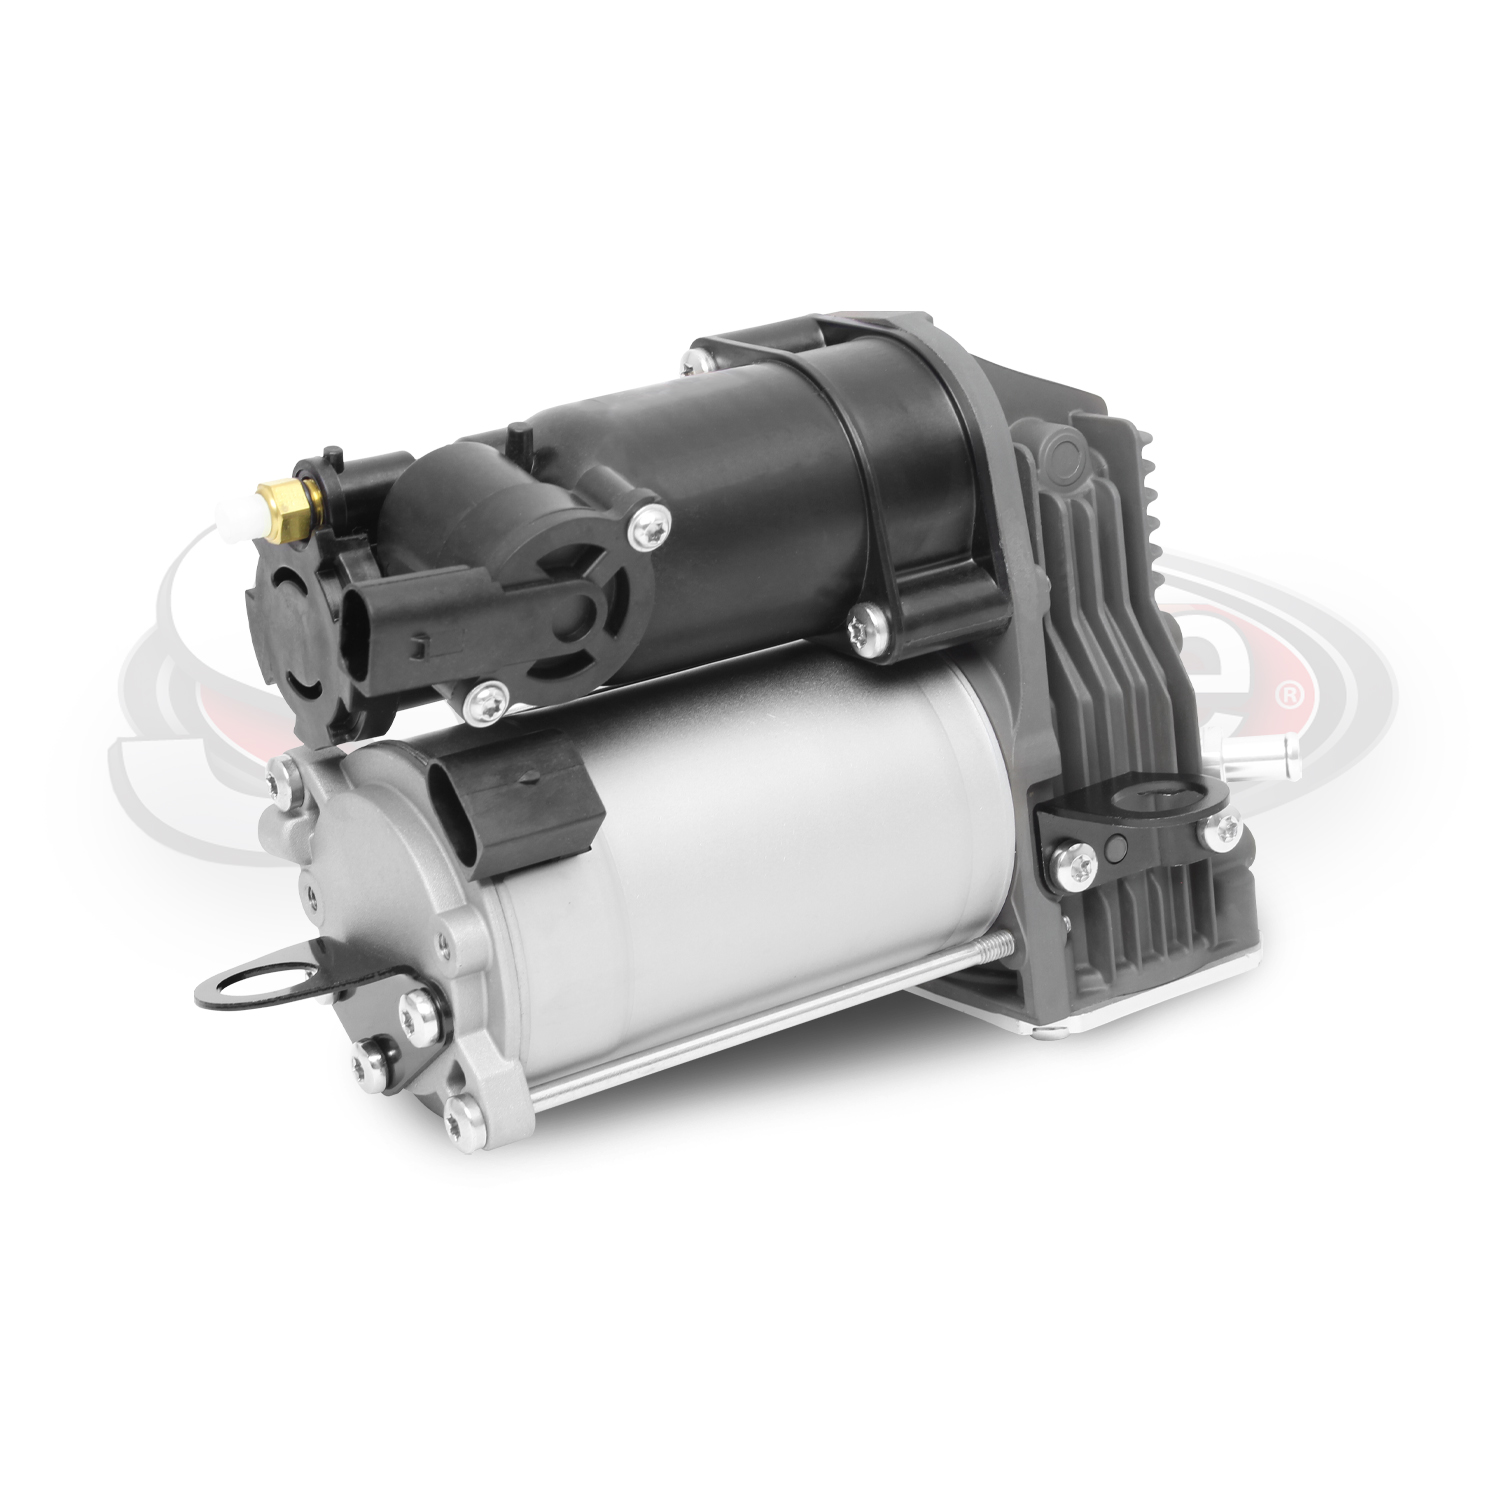 Airmatic Suspension Air Compressor for 4 Corner Air Leveling - W251 R Class